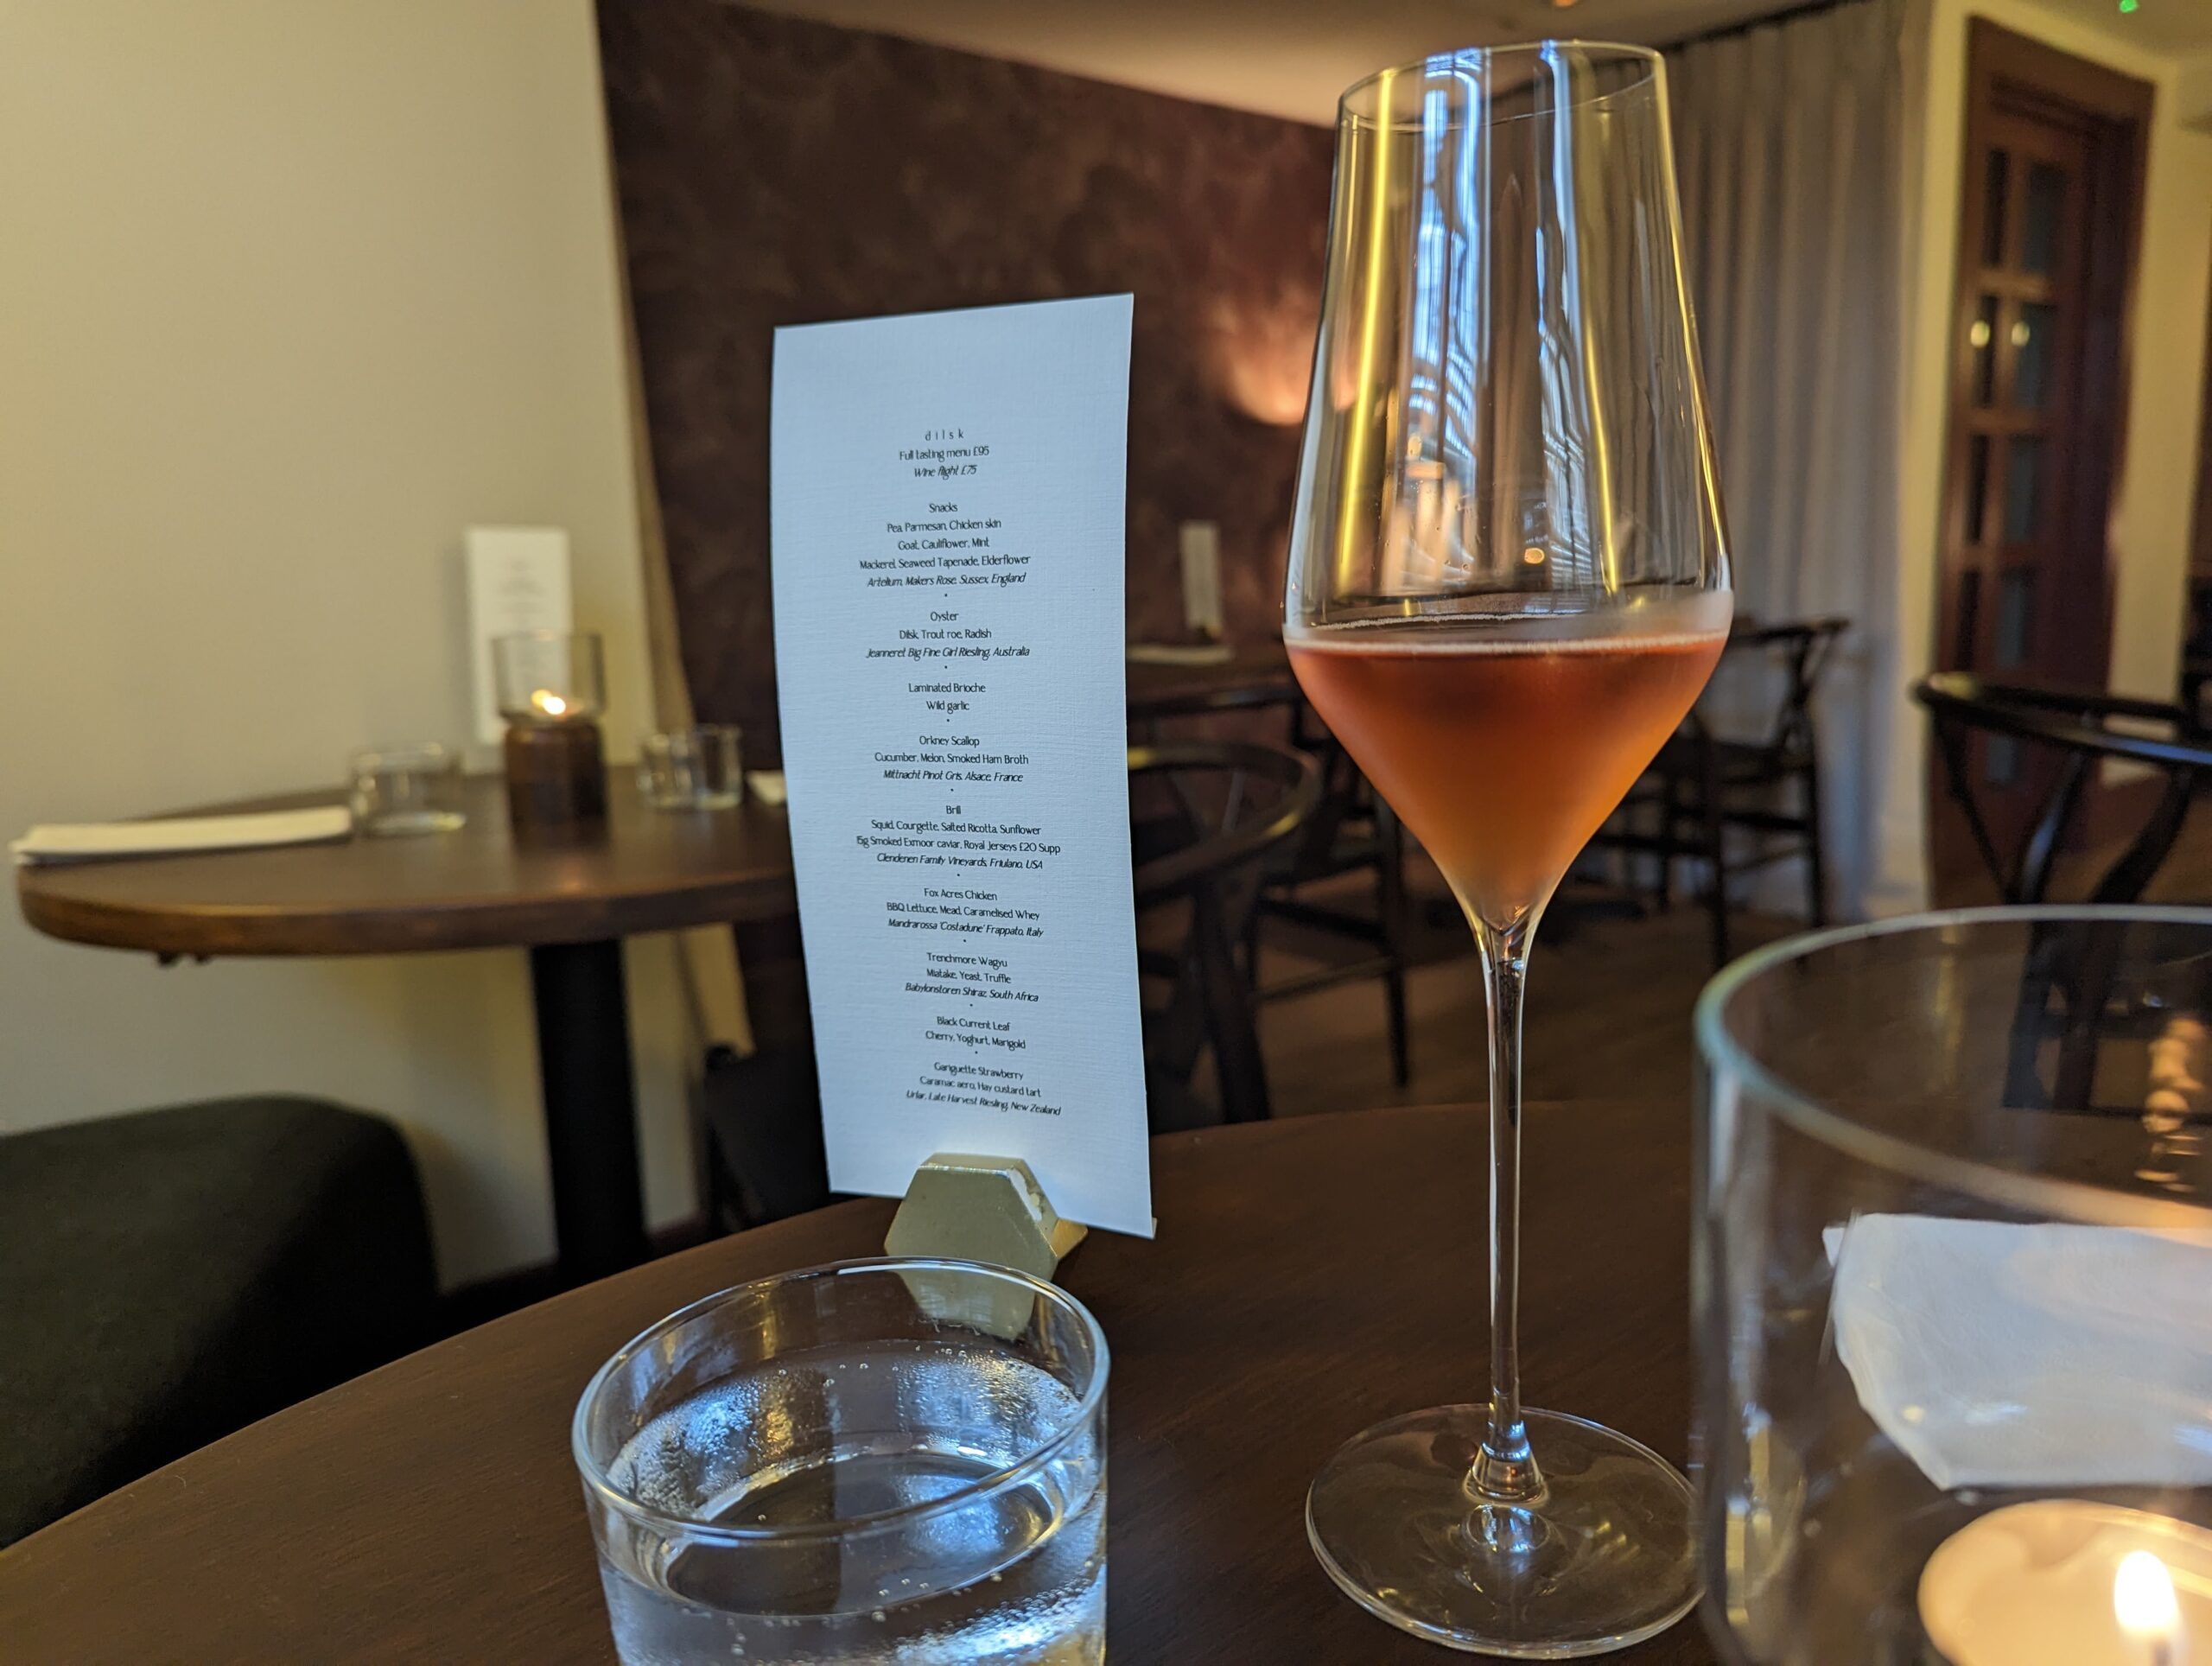 A Voyage of Discovery: Hidden Treasure at Dilsk. Glas of wine and menu on the table